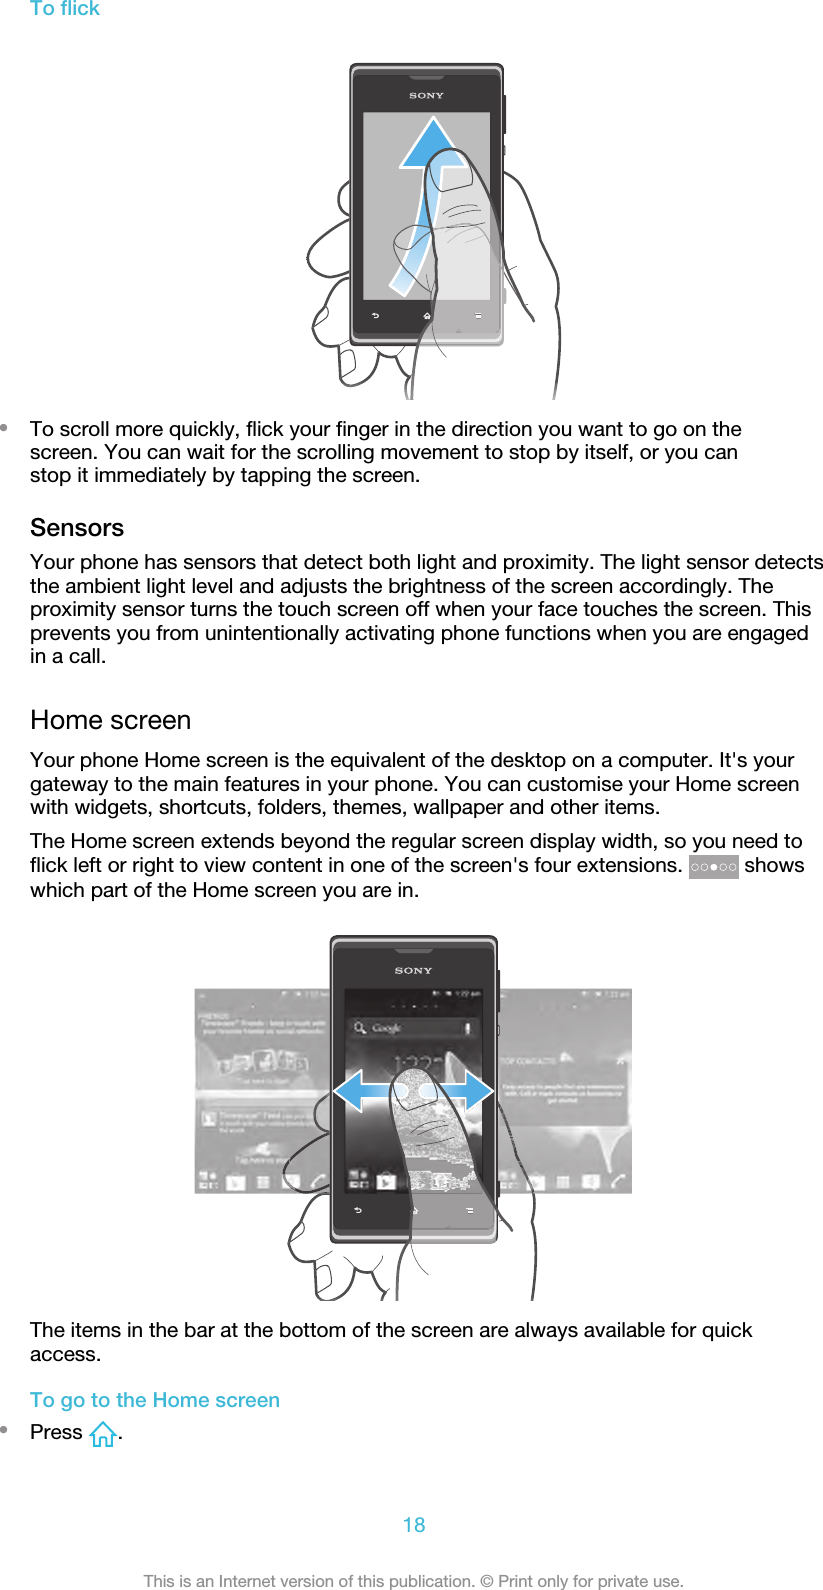 To flick•To scroll more quickly, flick your finger in the direction you want to go on thescreen. You can wait for the scrolling movement to stop by itself, or you canstop it immediately by tapping the screen.SensorsYour phone has sensors that detect both light and proximity. The light sensor detectsthe ambient light level and adjusts the brightness of the screen accordingly. Theproximity sensor turns the touch screen off when your face touches the screen. Thisprevents you from unintentionally activating phone functions when you are engagedin a call.Home screenYour phone Home screen is the equivalent of the desktop on a computer. It&apos;s yourgateway to the main features in your phone. You can customise your Home screenwith widgets, shortcuts, folders, themes, wallpaper and other items.The Home screen extends beyond the regular screen display width, so you need toflick left or right to view content in one of the screen&apos;s four extensions.   showswhich part of the Home screen you are in.The items in the bar at the bottom of the screen are always available for quickaccess.To go to the Home screen•Press  .18This is an Internet version of this publication. © Print only for private use.